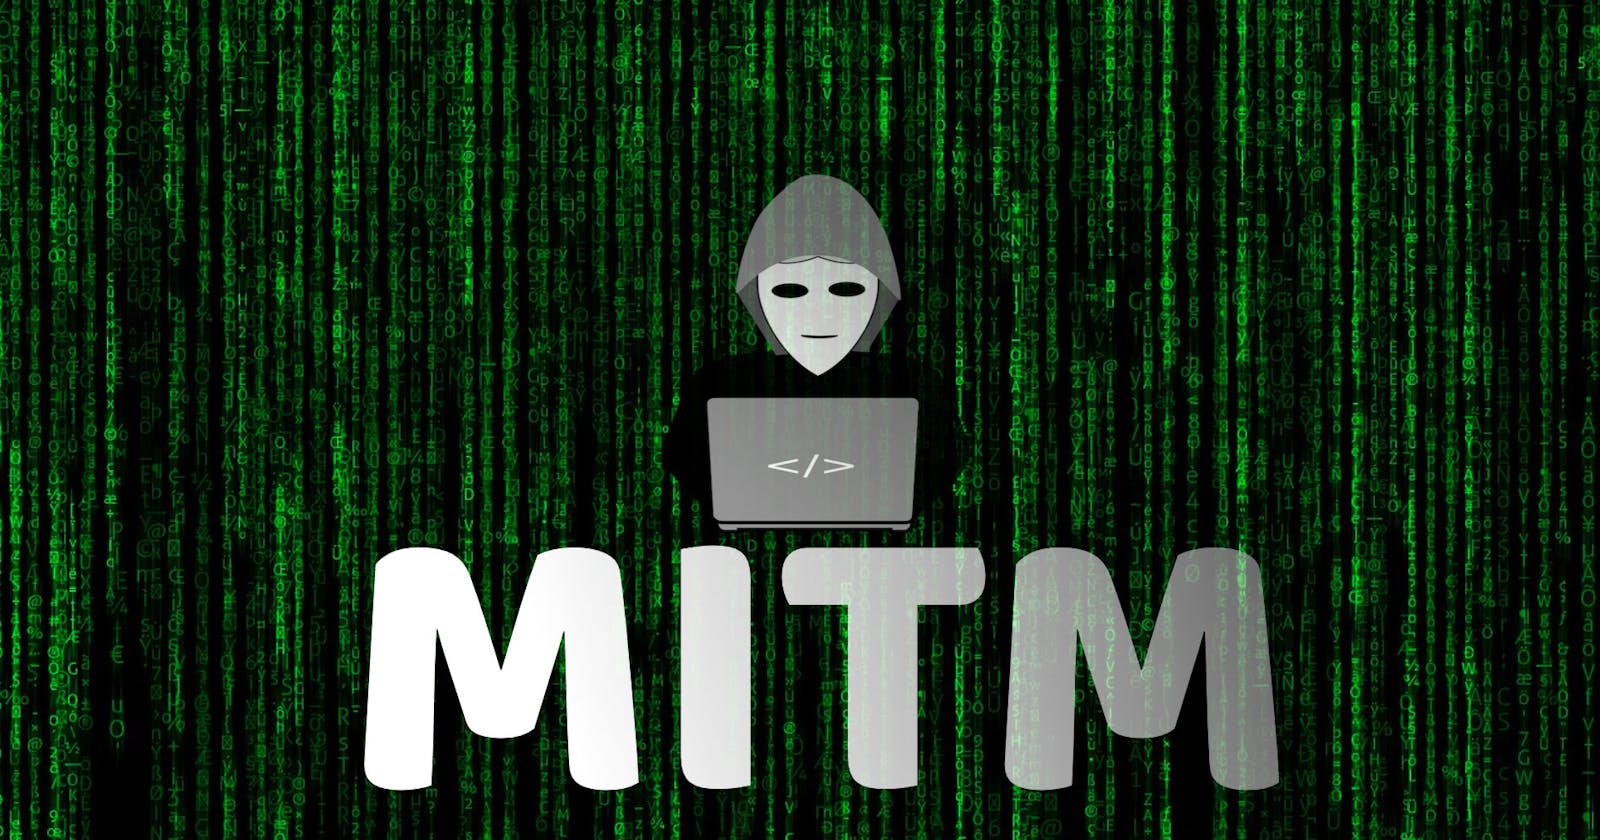 MITM (Man-In-The-Middle) Attacks and Prevention